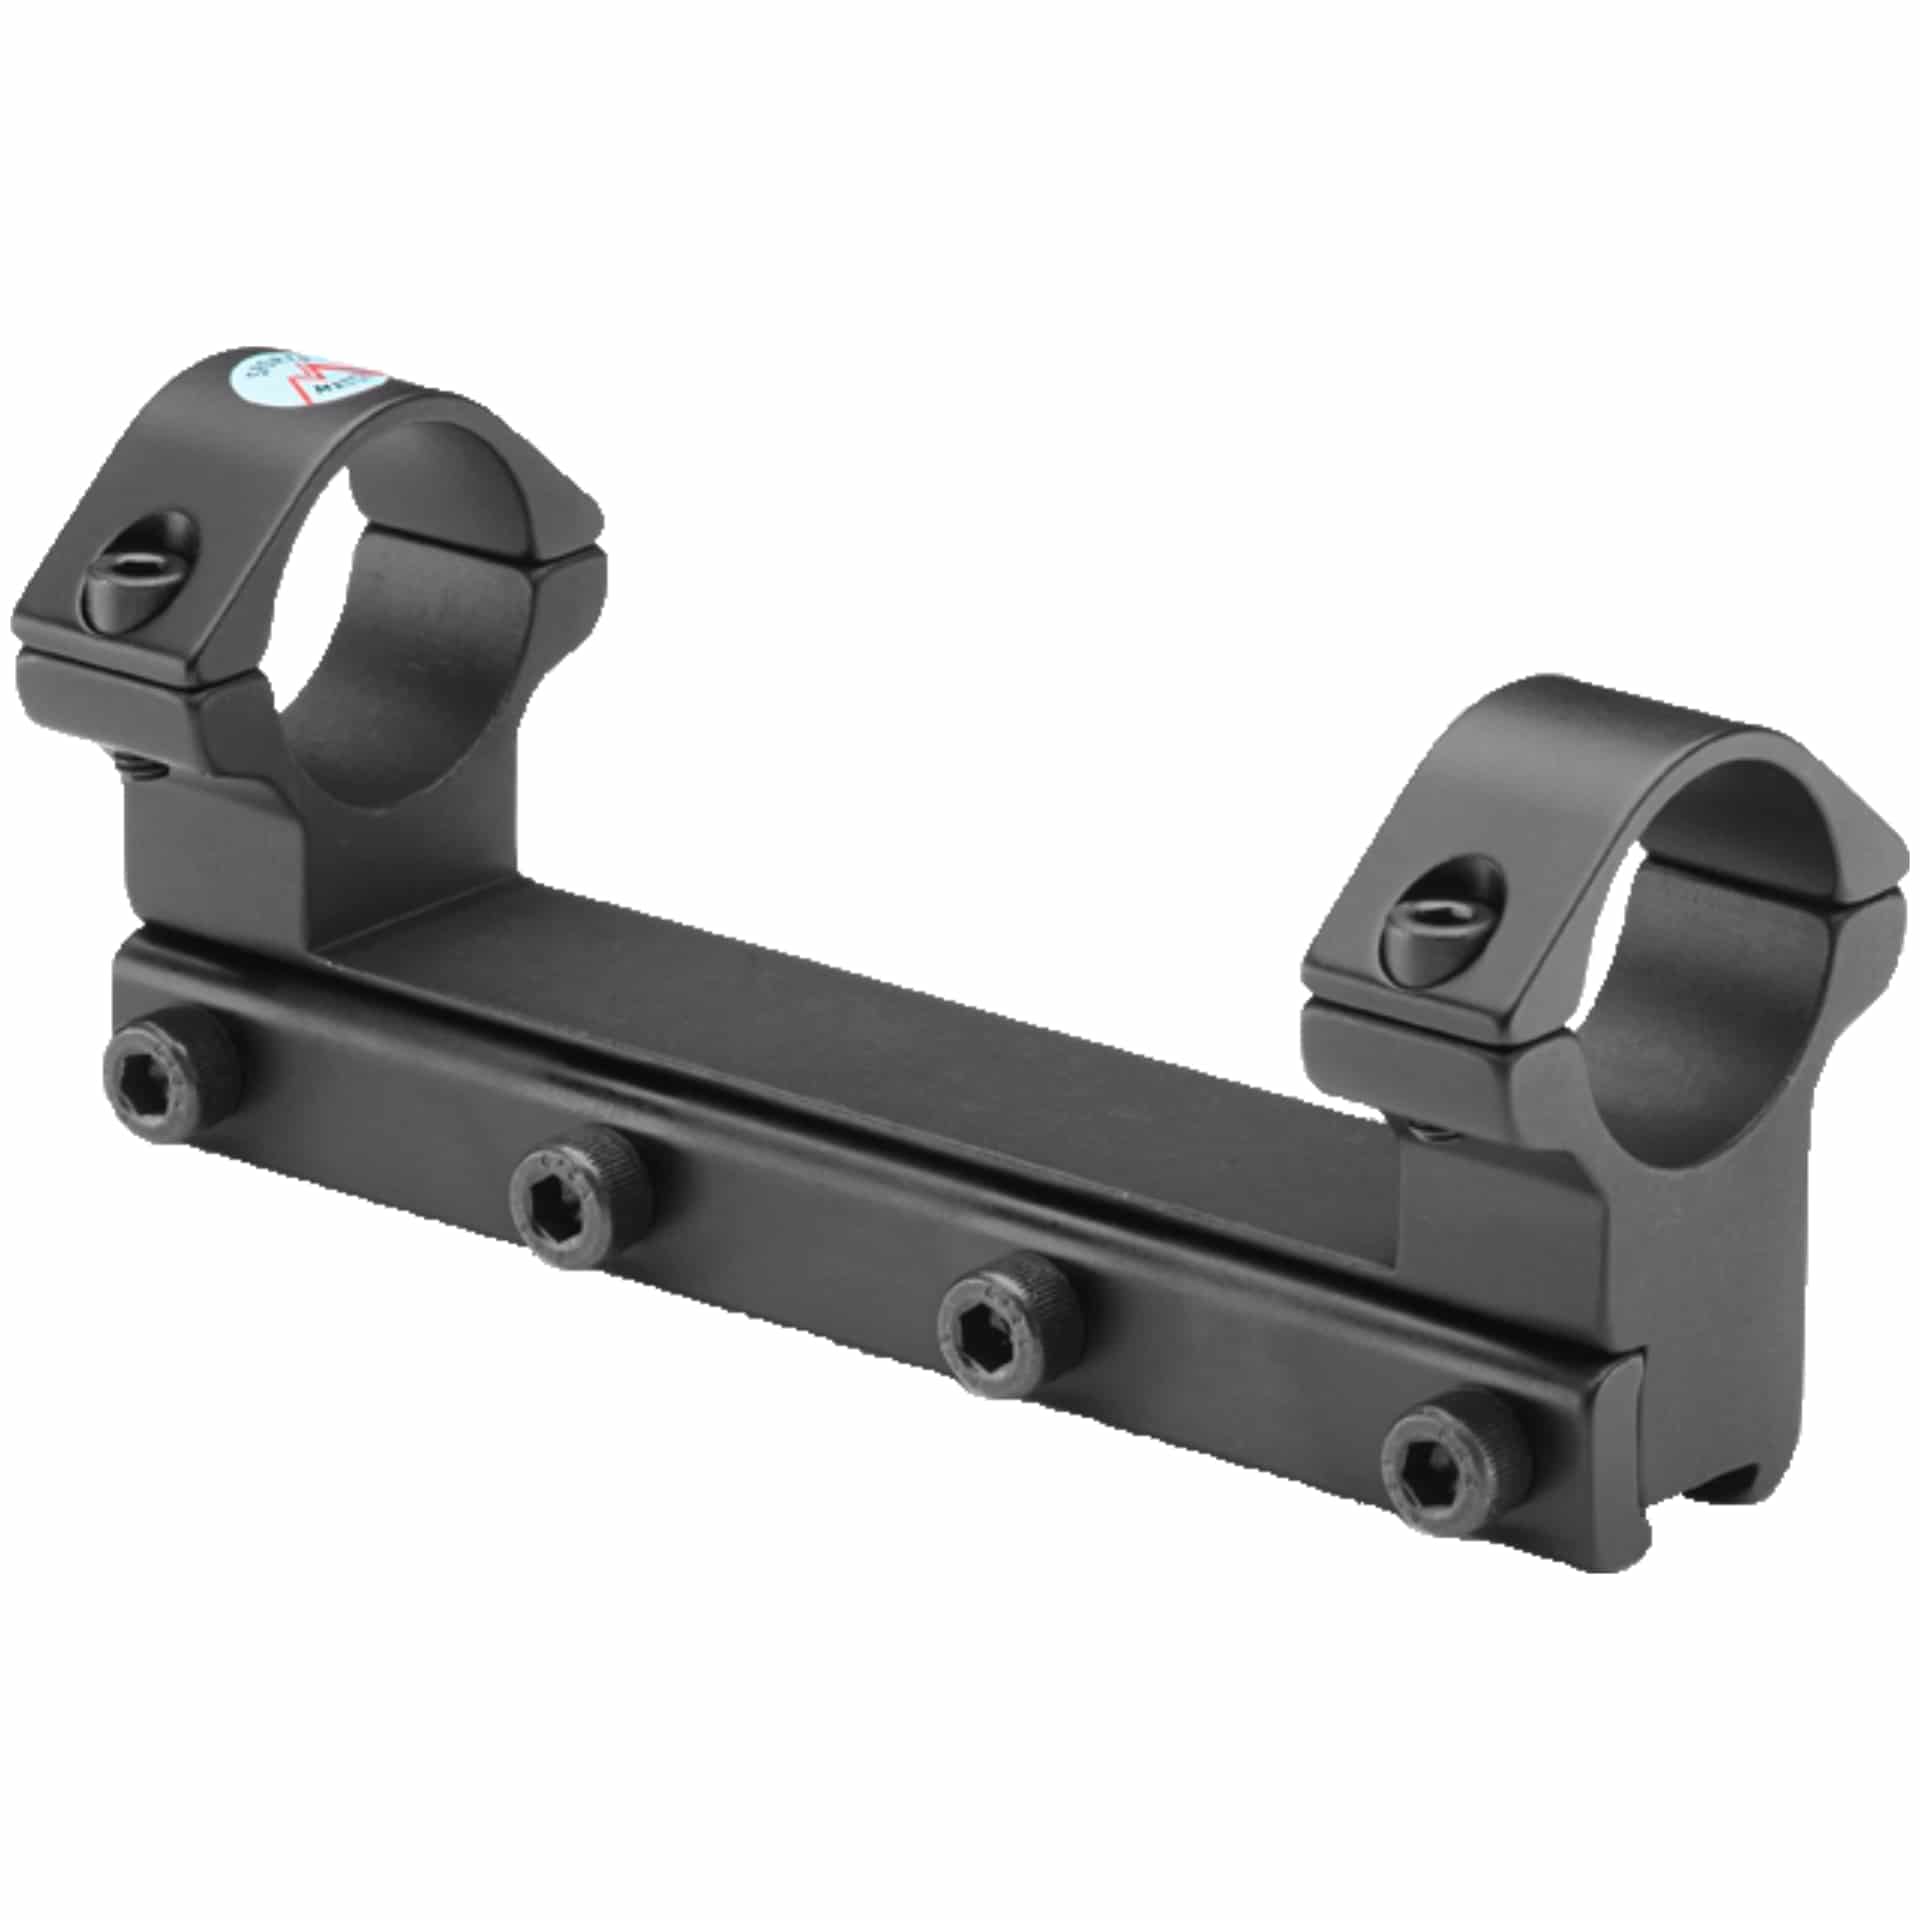 1" high, prism rail, tilted, one-piece